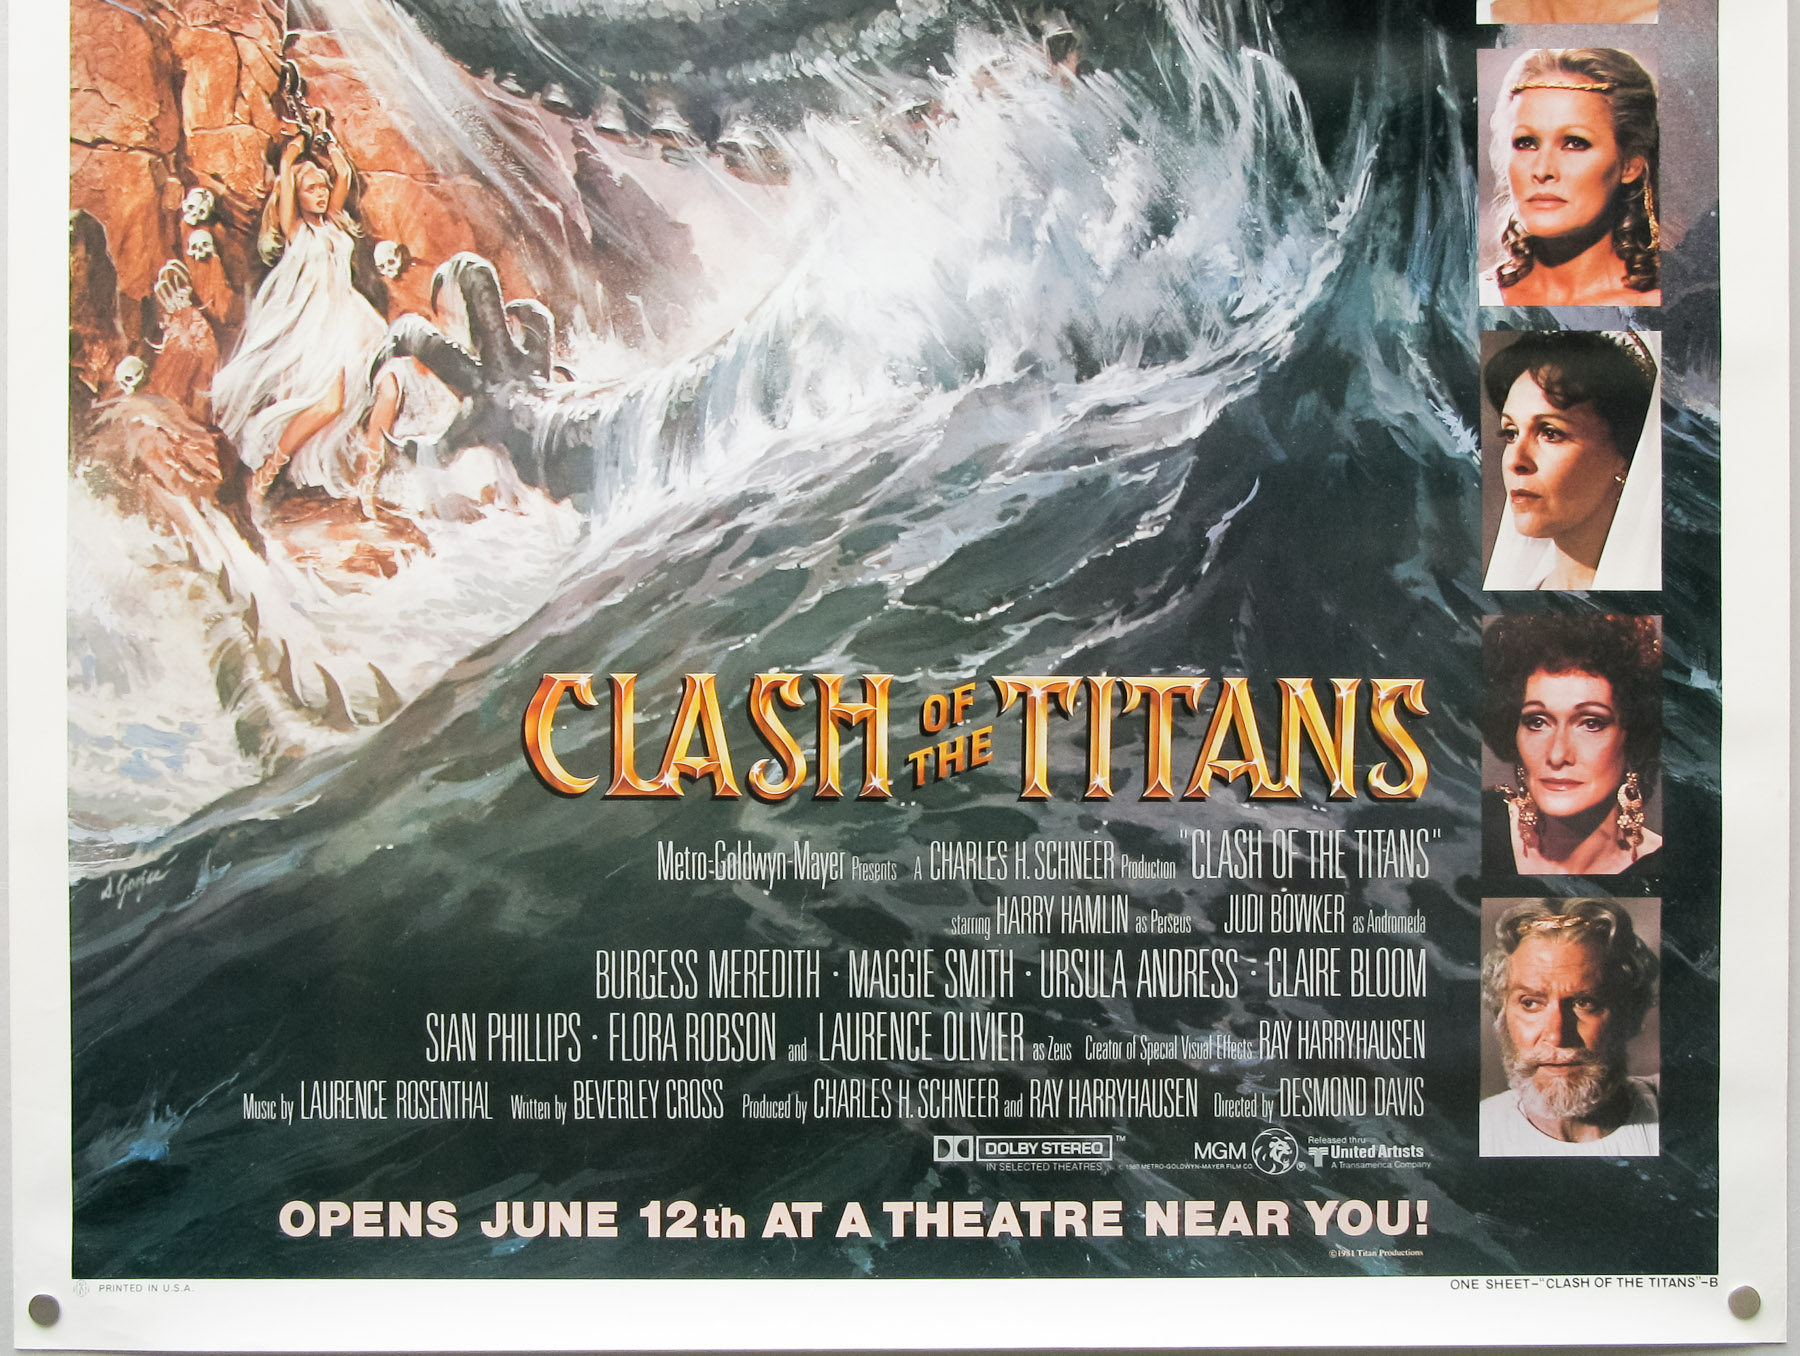 Vintage Clash of The Titans Movie Poster, Original Advance One Sheet 27 x 41